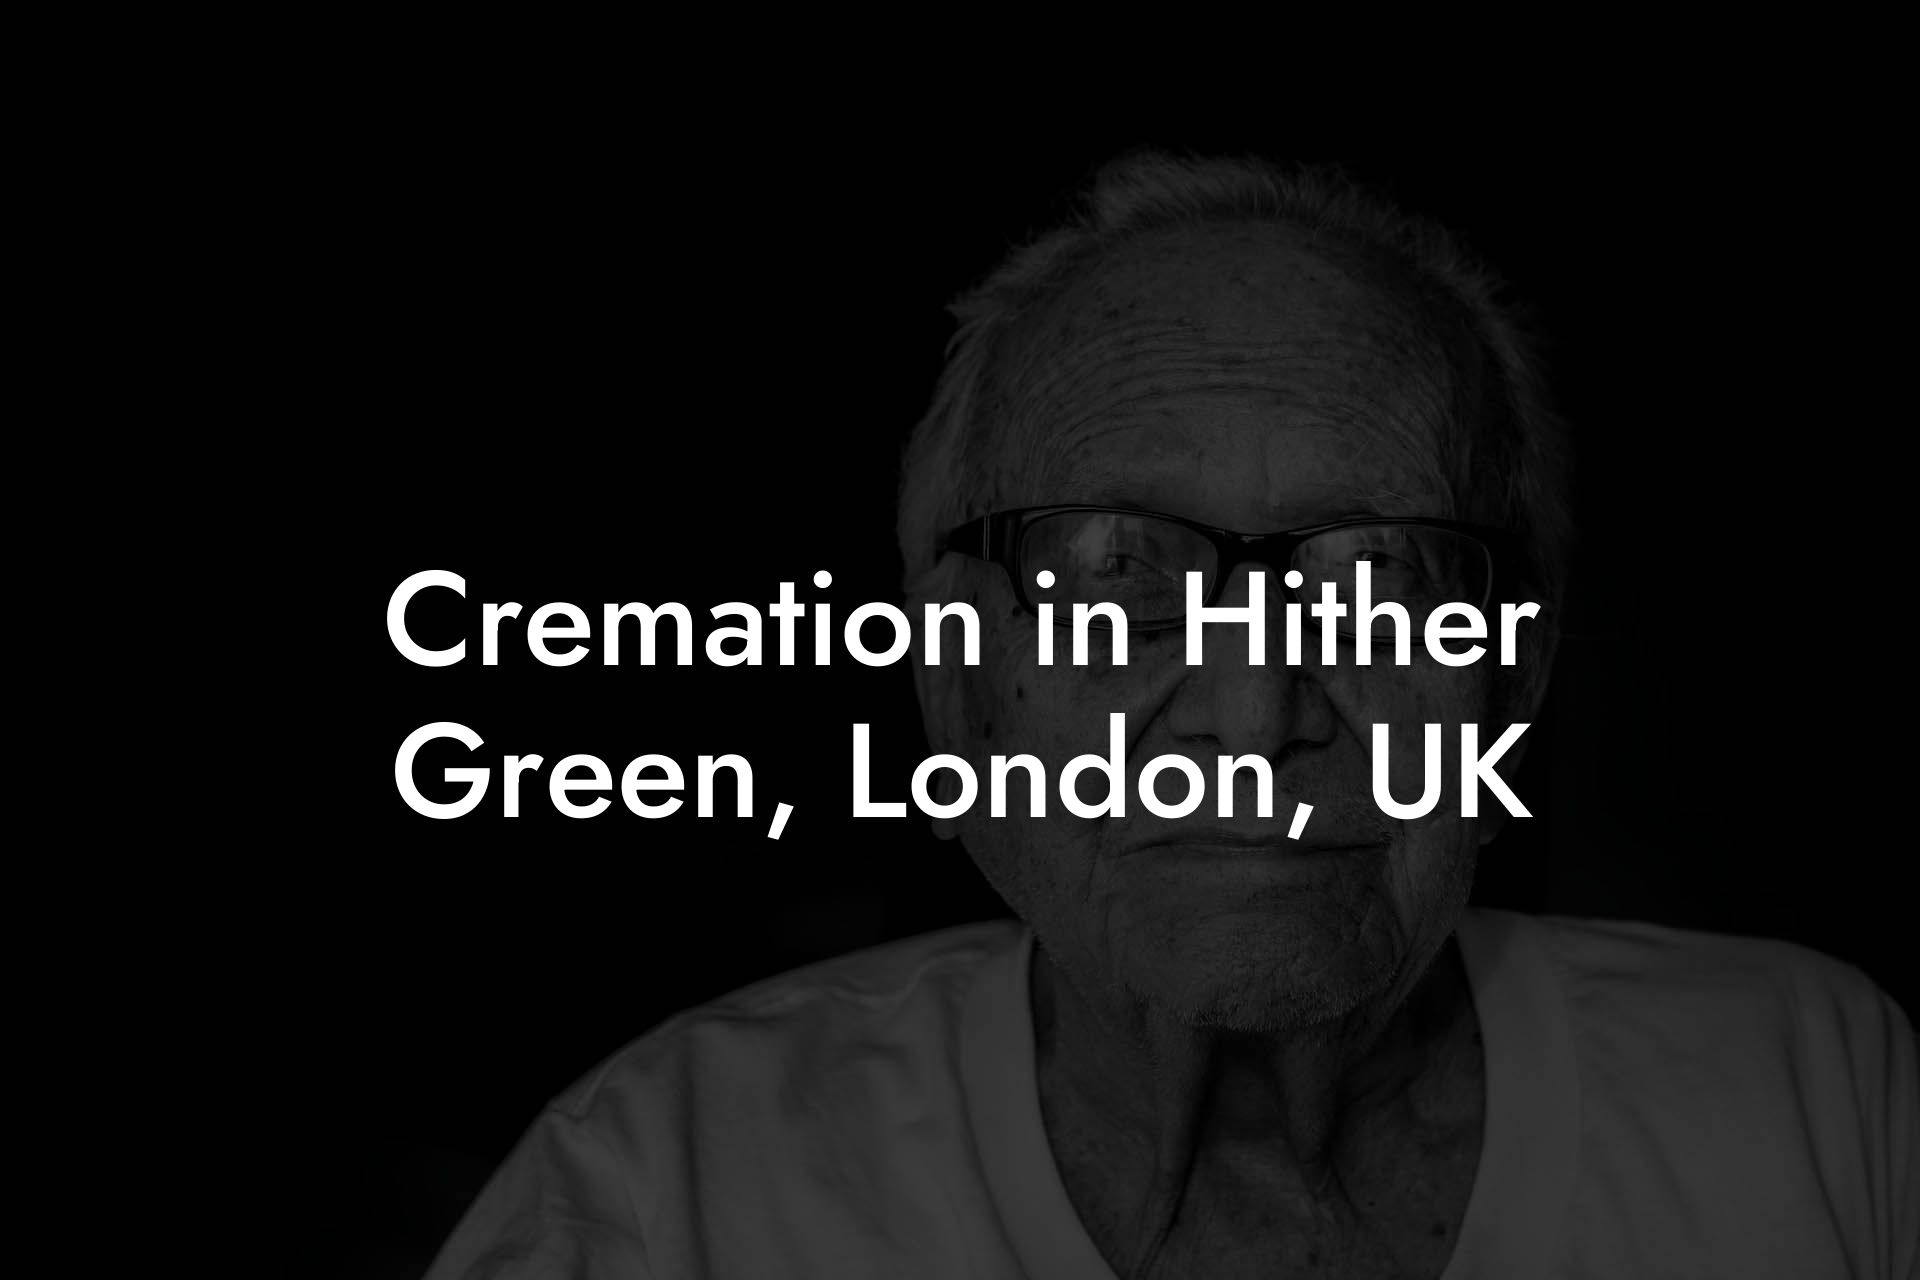 Cremation in Hither Green, London, UK